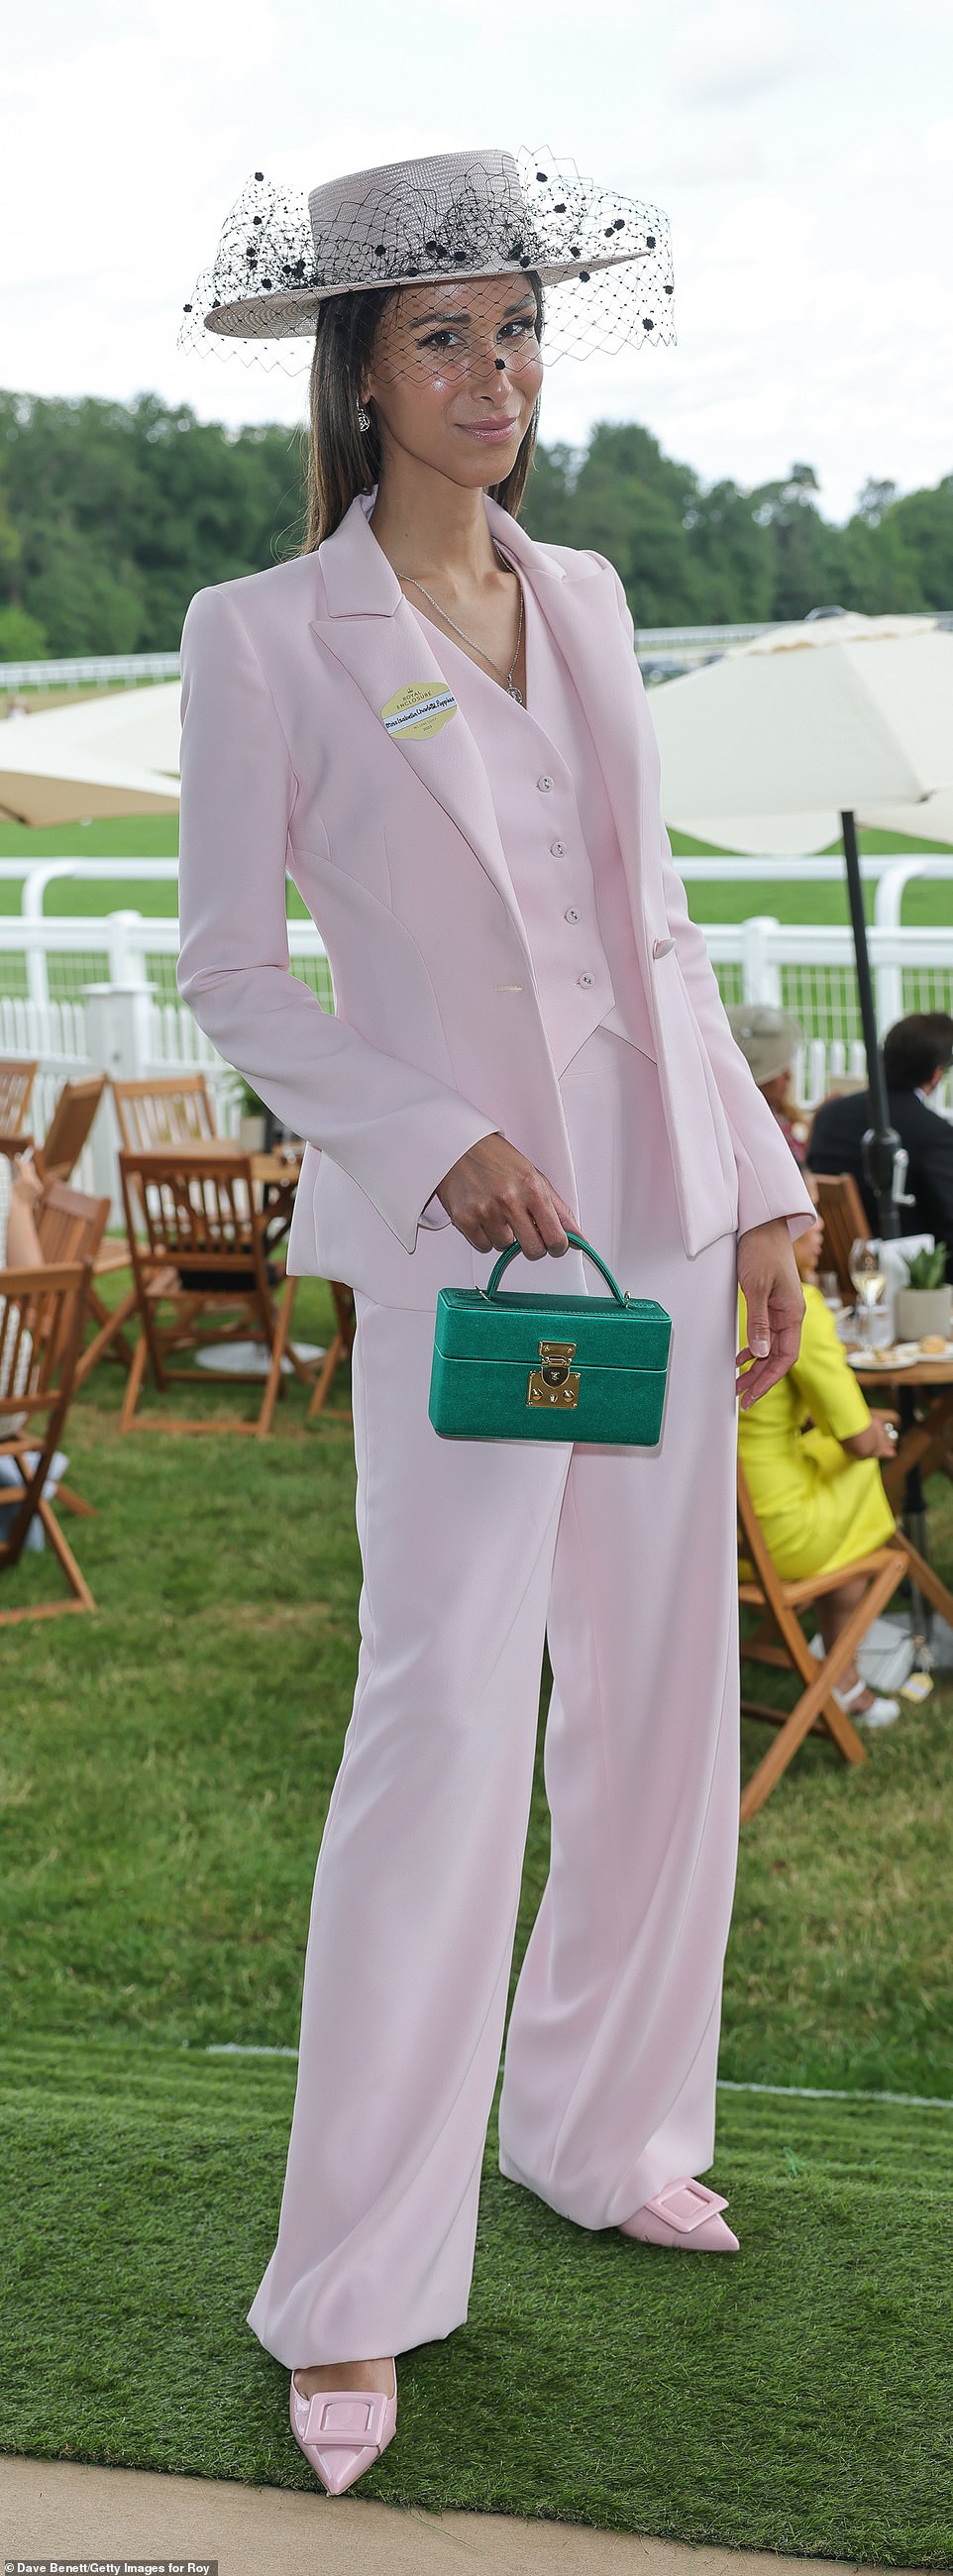 Presenter Isabella Charlotta Poppius took advantage of this year's relaxed dress code which permits women to wear trousers with a dusty pink suit